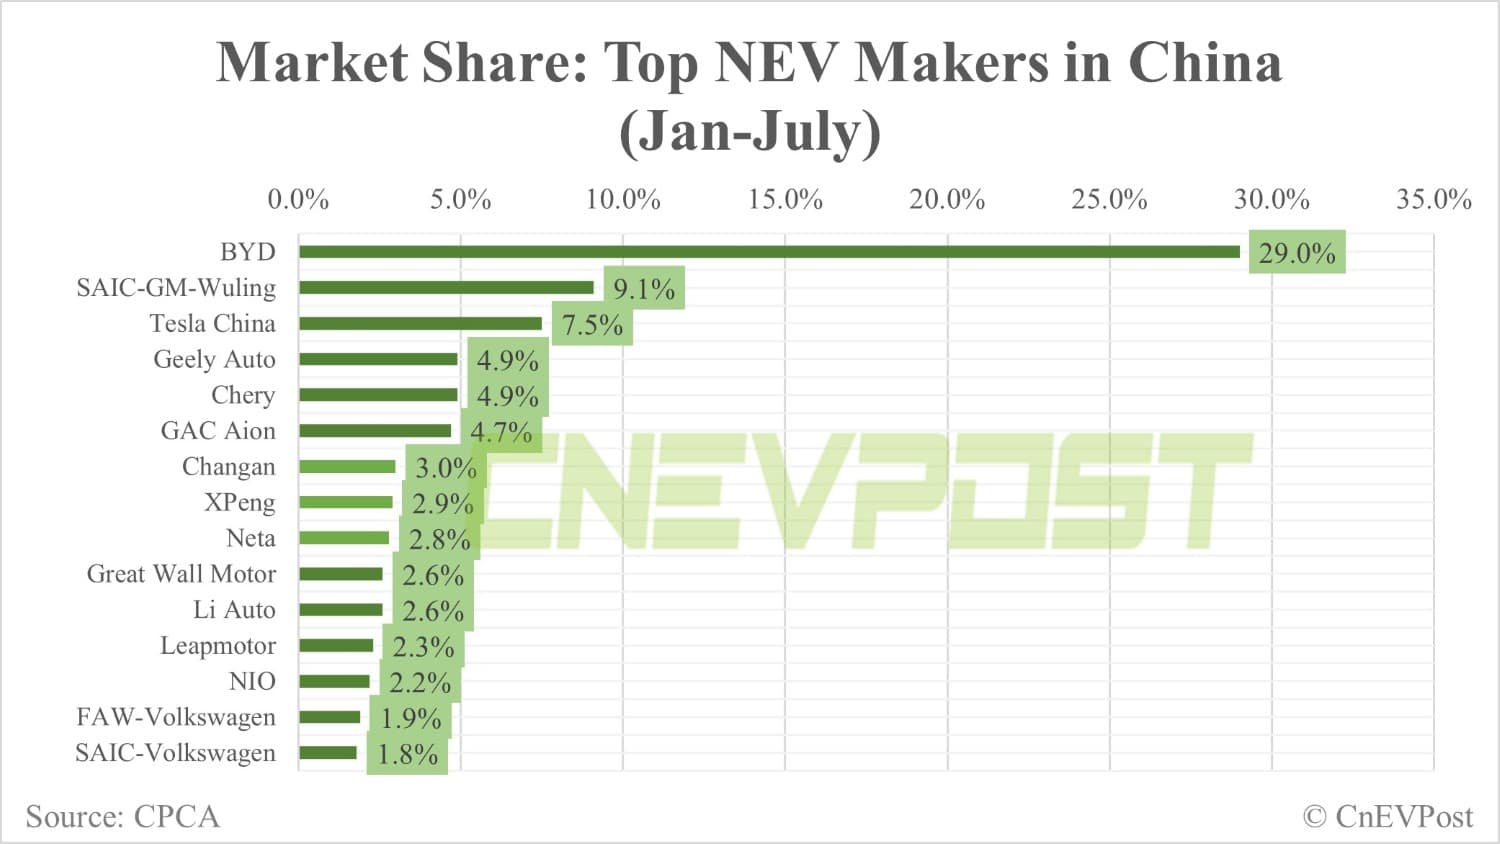 BYD contributes 32.7% of China's NEV sales in July-CnEVPost